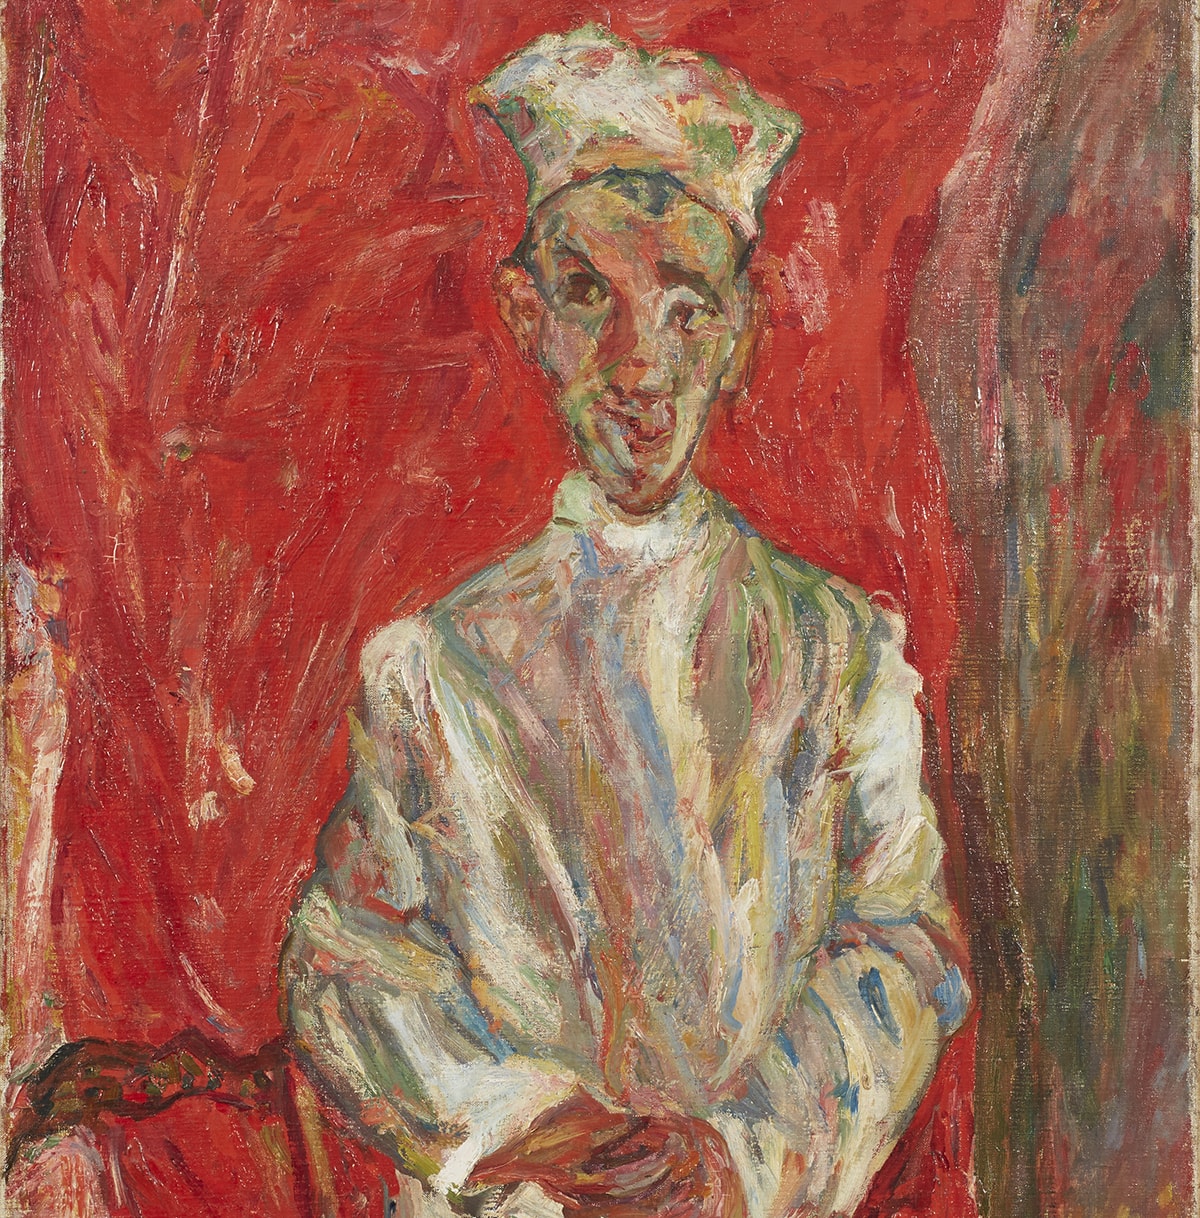 A vertical painting featuring a full-length male figure standing with his hands clasped in front. His left foot is placed in front of the other pointing to the right of the picture. He wears a cap atop a long face with a pointed chin. His ears protrude from either side of his head, bits of black hair poking out by his ears and at his forehead. Large dark eyes look off to the viewer’s left. He wears what appears to be a long-sleeve, high-collared white shirt. When examined more closely, the white shirt as well as his cap and shoes are made up of many colors in addition to white—grays, blues, green, yellows, tan, orange, and dashes of red applied in broad, rough brushstrokes. Similarly, his baggy, brownish pants are painted with strokes of brown, black, yellow, red, orange, and tan. To the left of the figure stands a brown chair with ornate slatted back. Behind the figure is a field of mottled red tones making up most of the width of the painting, suggesting a curtain. A narrow swath of reds, browns, yellows complete the right side of the painting running from top to bottom.